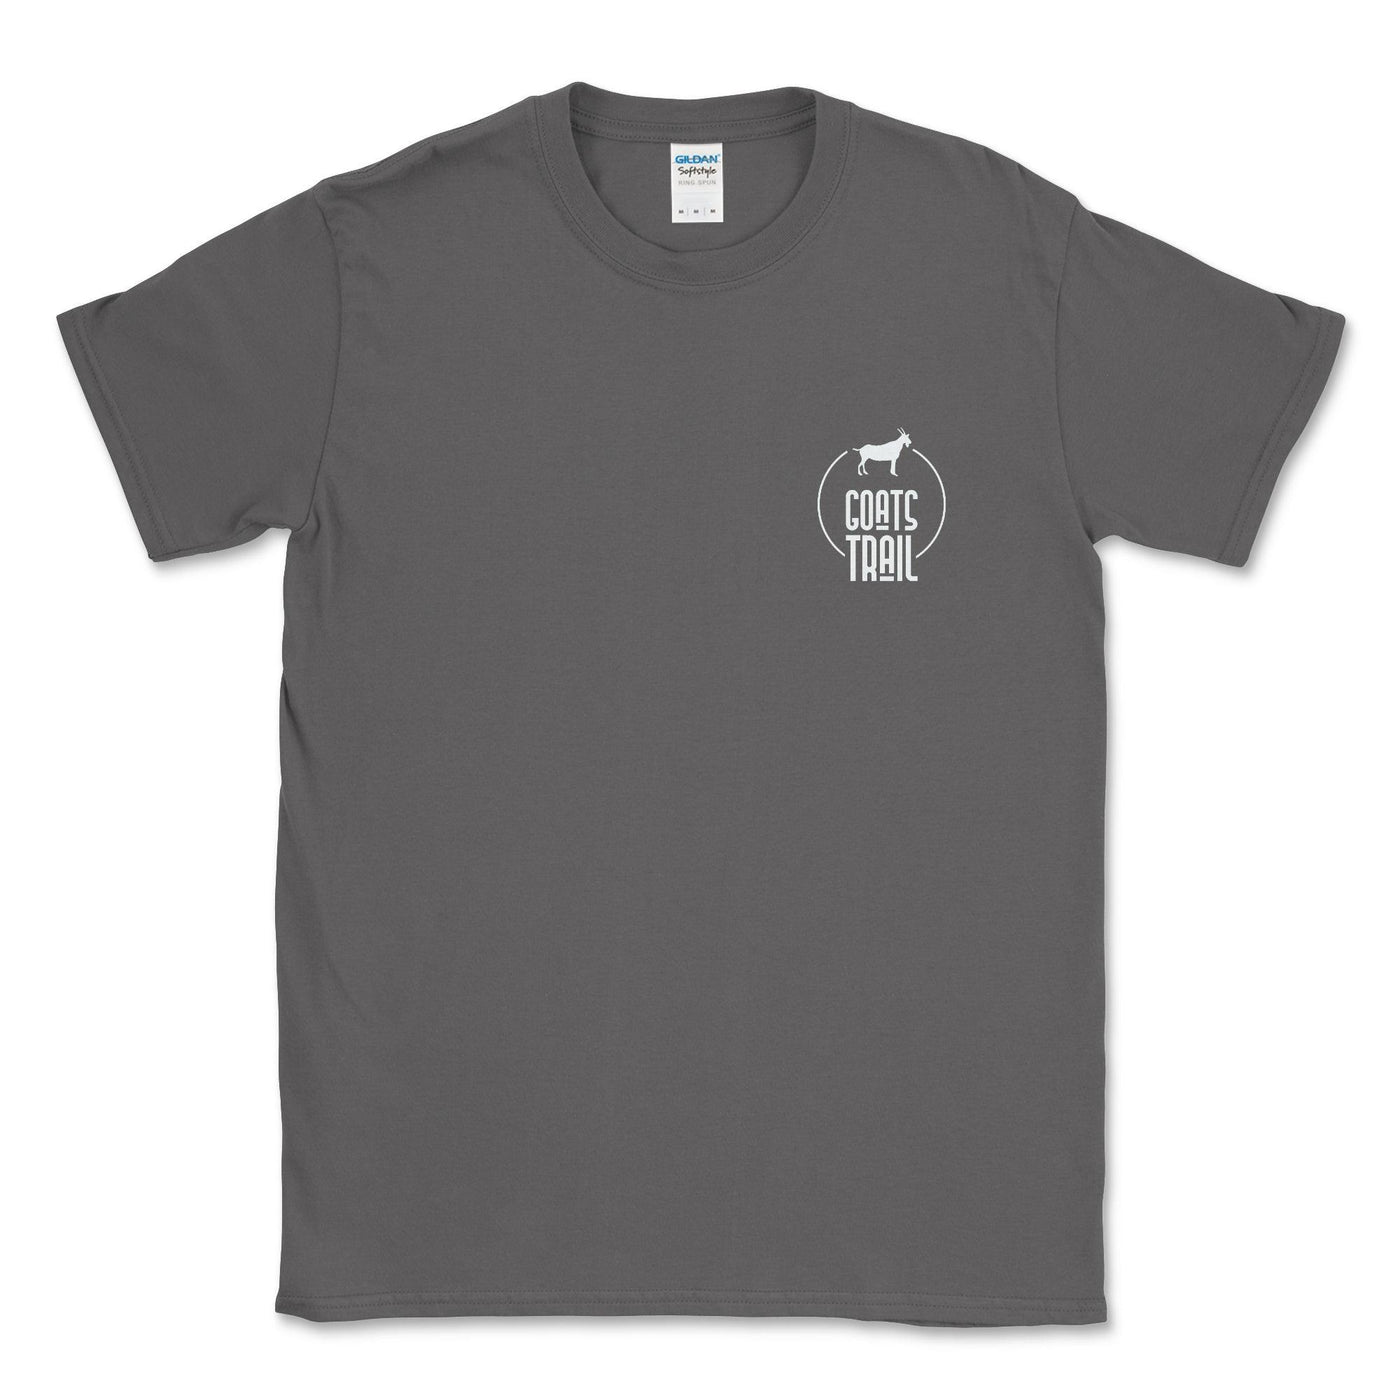 Big and Tall-Built Not Bought T-shirt - Goats Trail